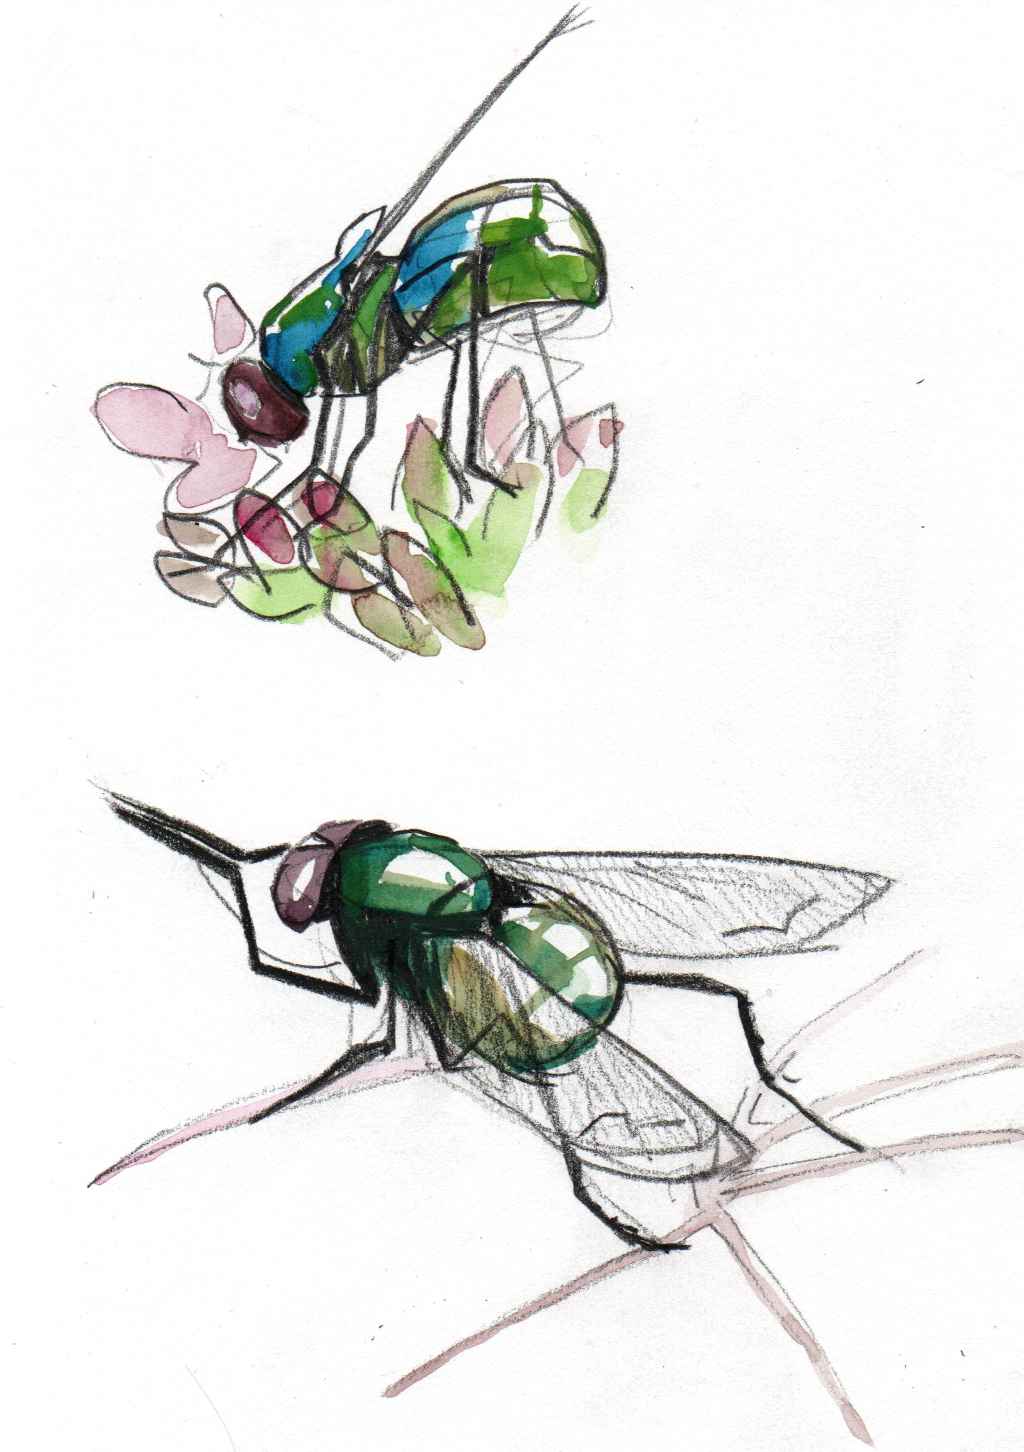 2 studies of flies in pencil and watercolour